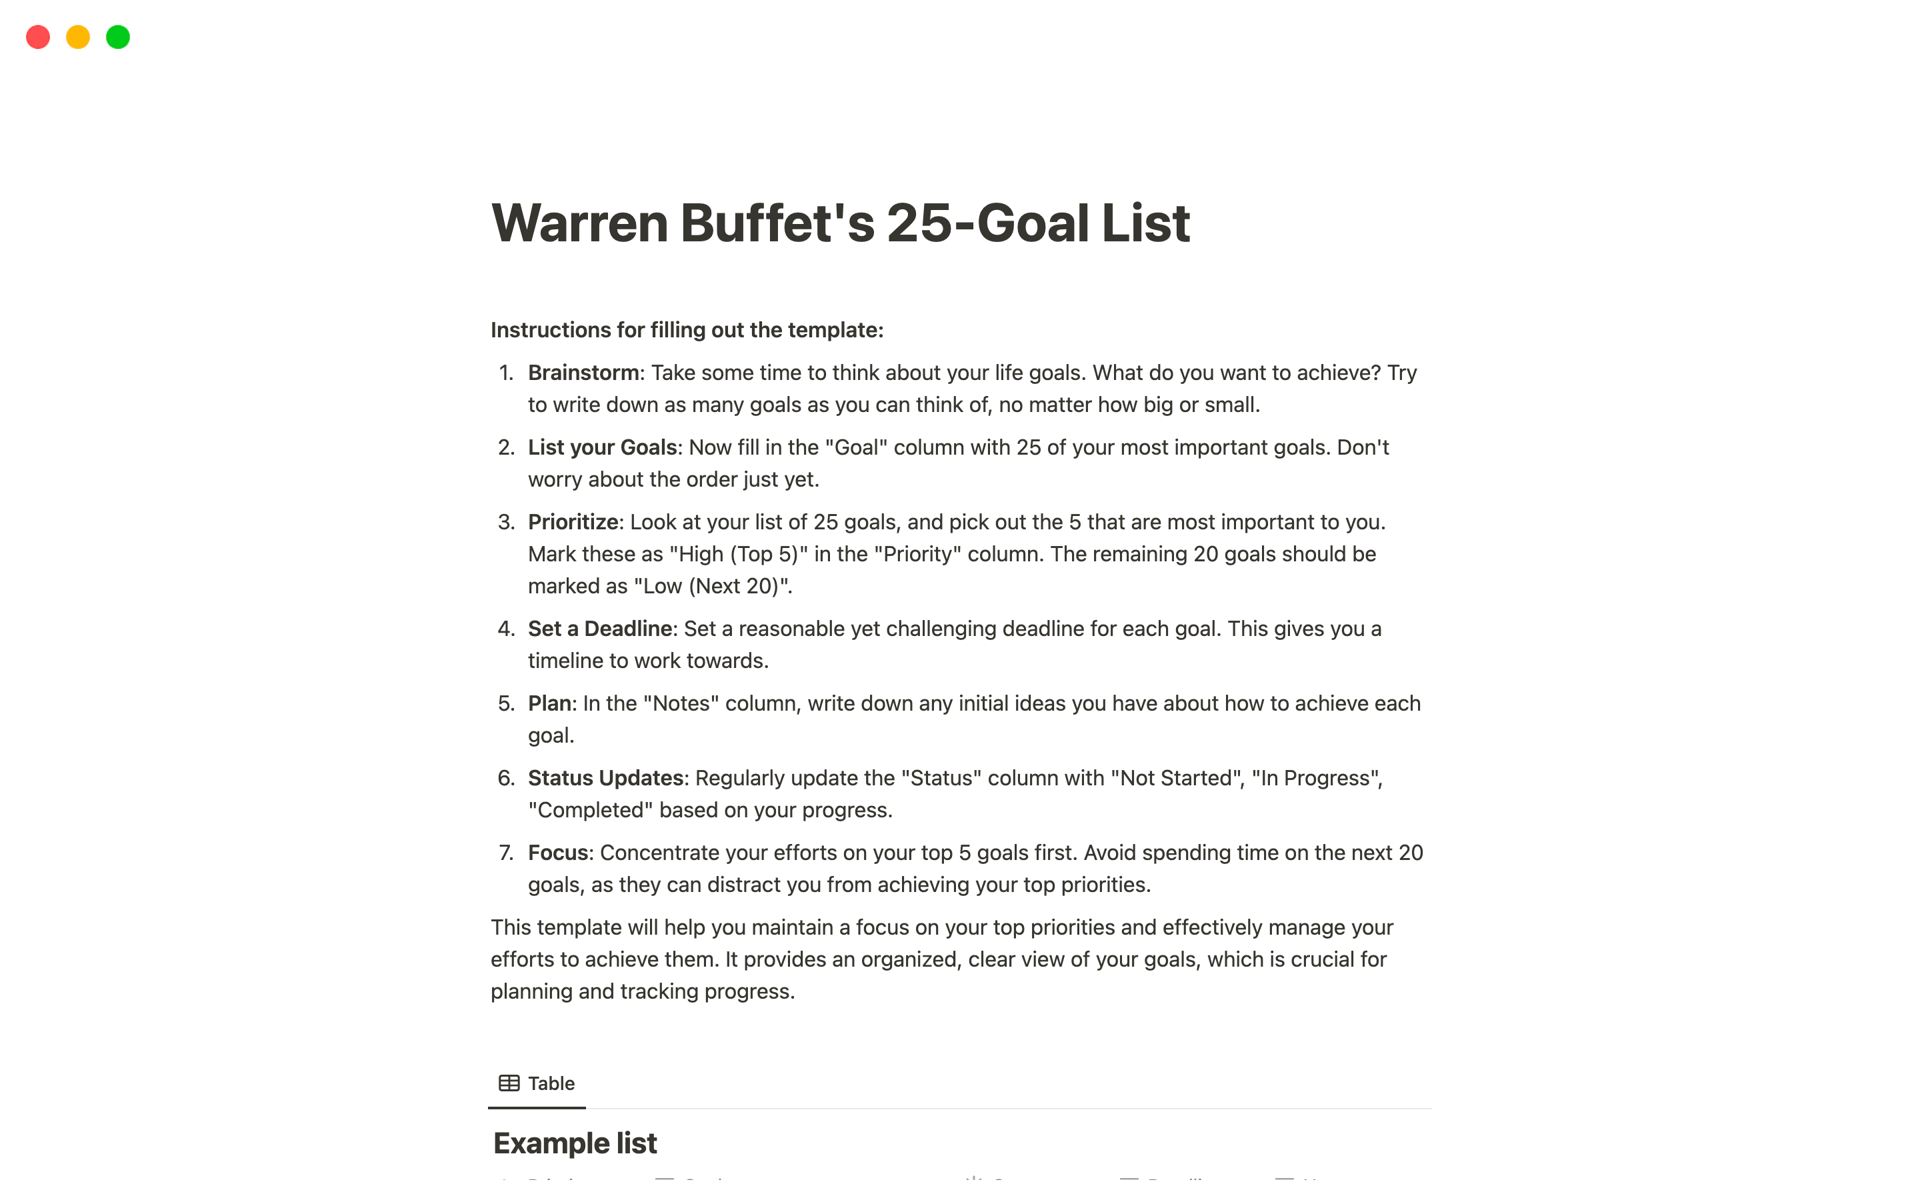 Boost your productivity and focus with our '25 Goals List' Notion template. Based on Warren Buffet's success strategy, this very simple template will guide you in prioritizing your life's top goals.